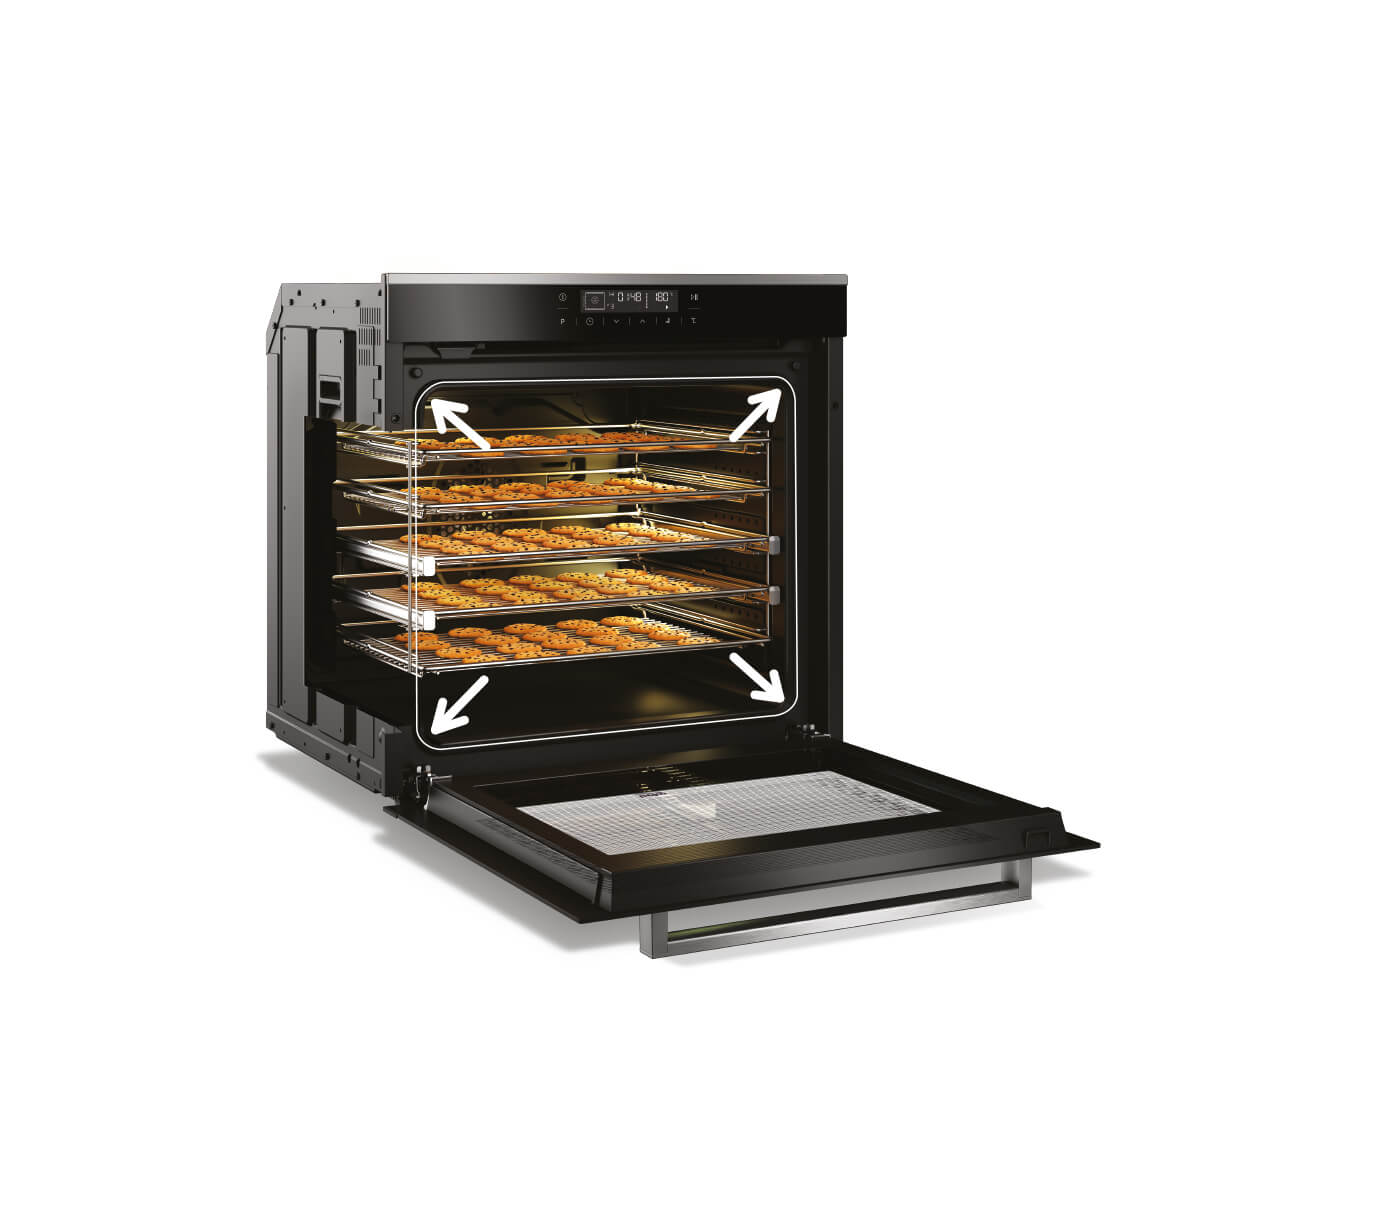 Large 82L Oven Capacity